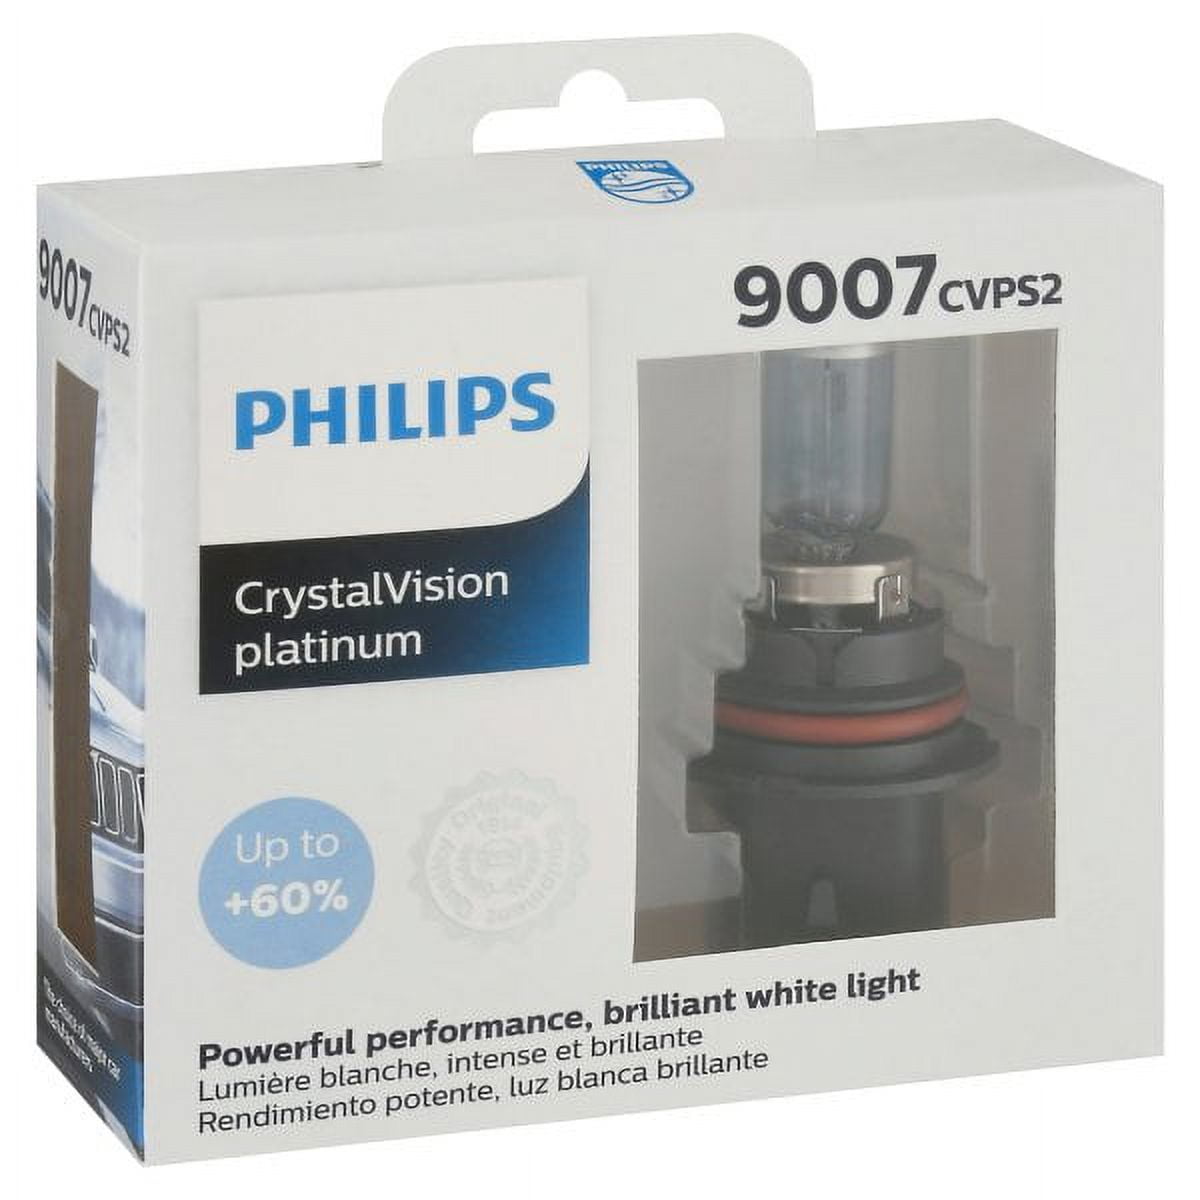  Philips UltinonSport H1 LED Bulb for Fog Light and Powersports  Headlights, 2 Pack : Automotive